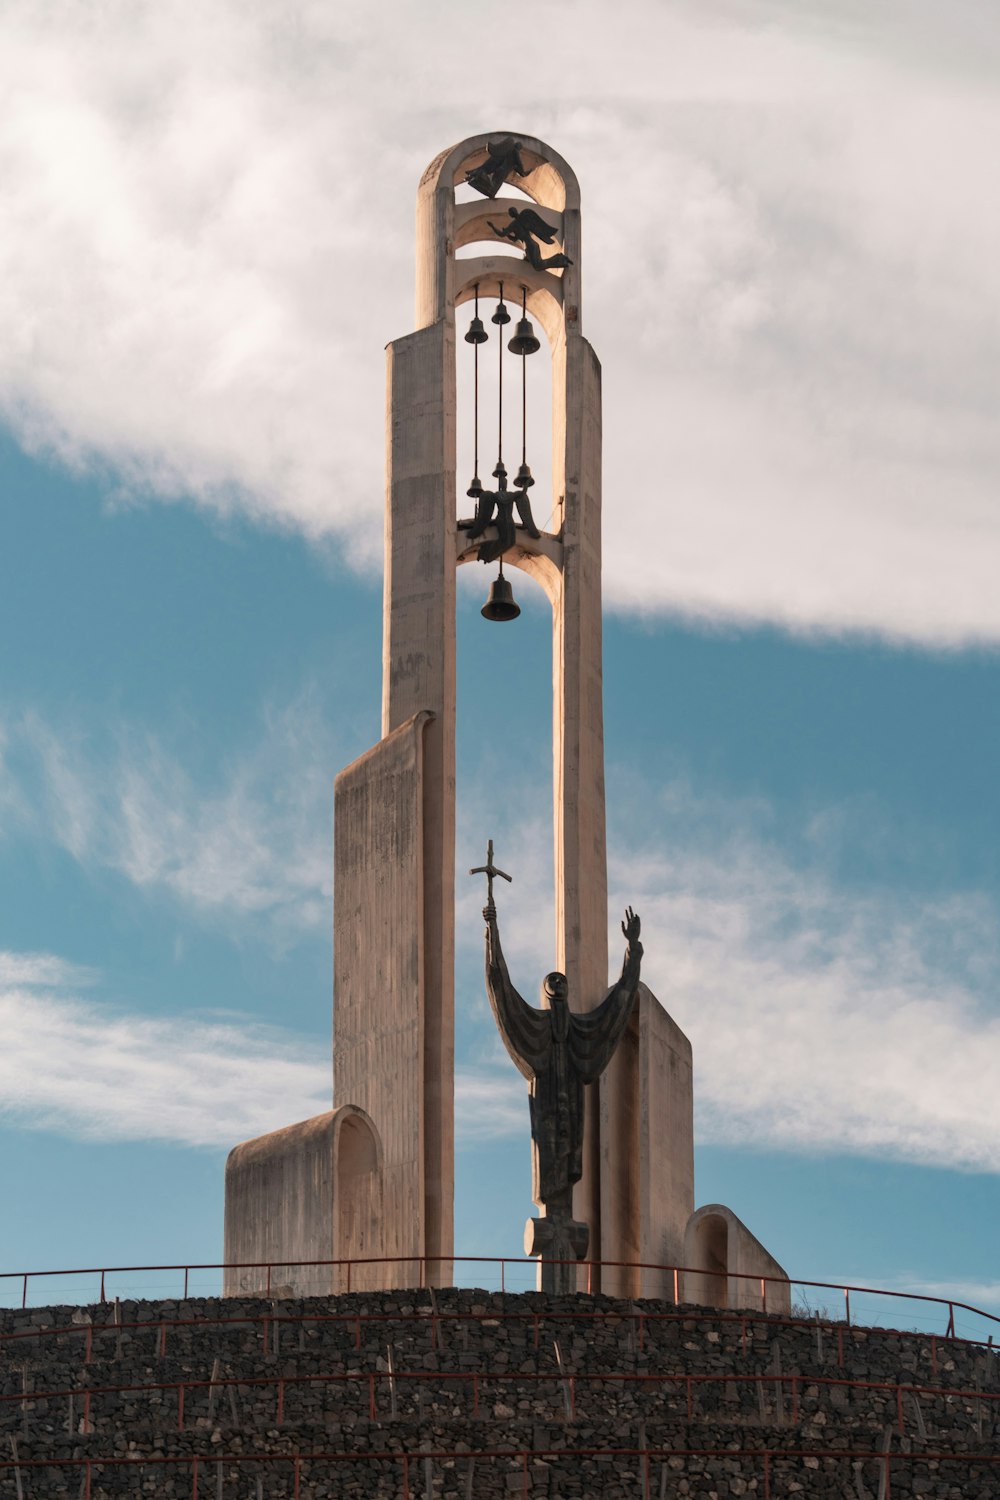 a tall clock tower with a statue of a person holding a cross